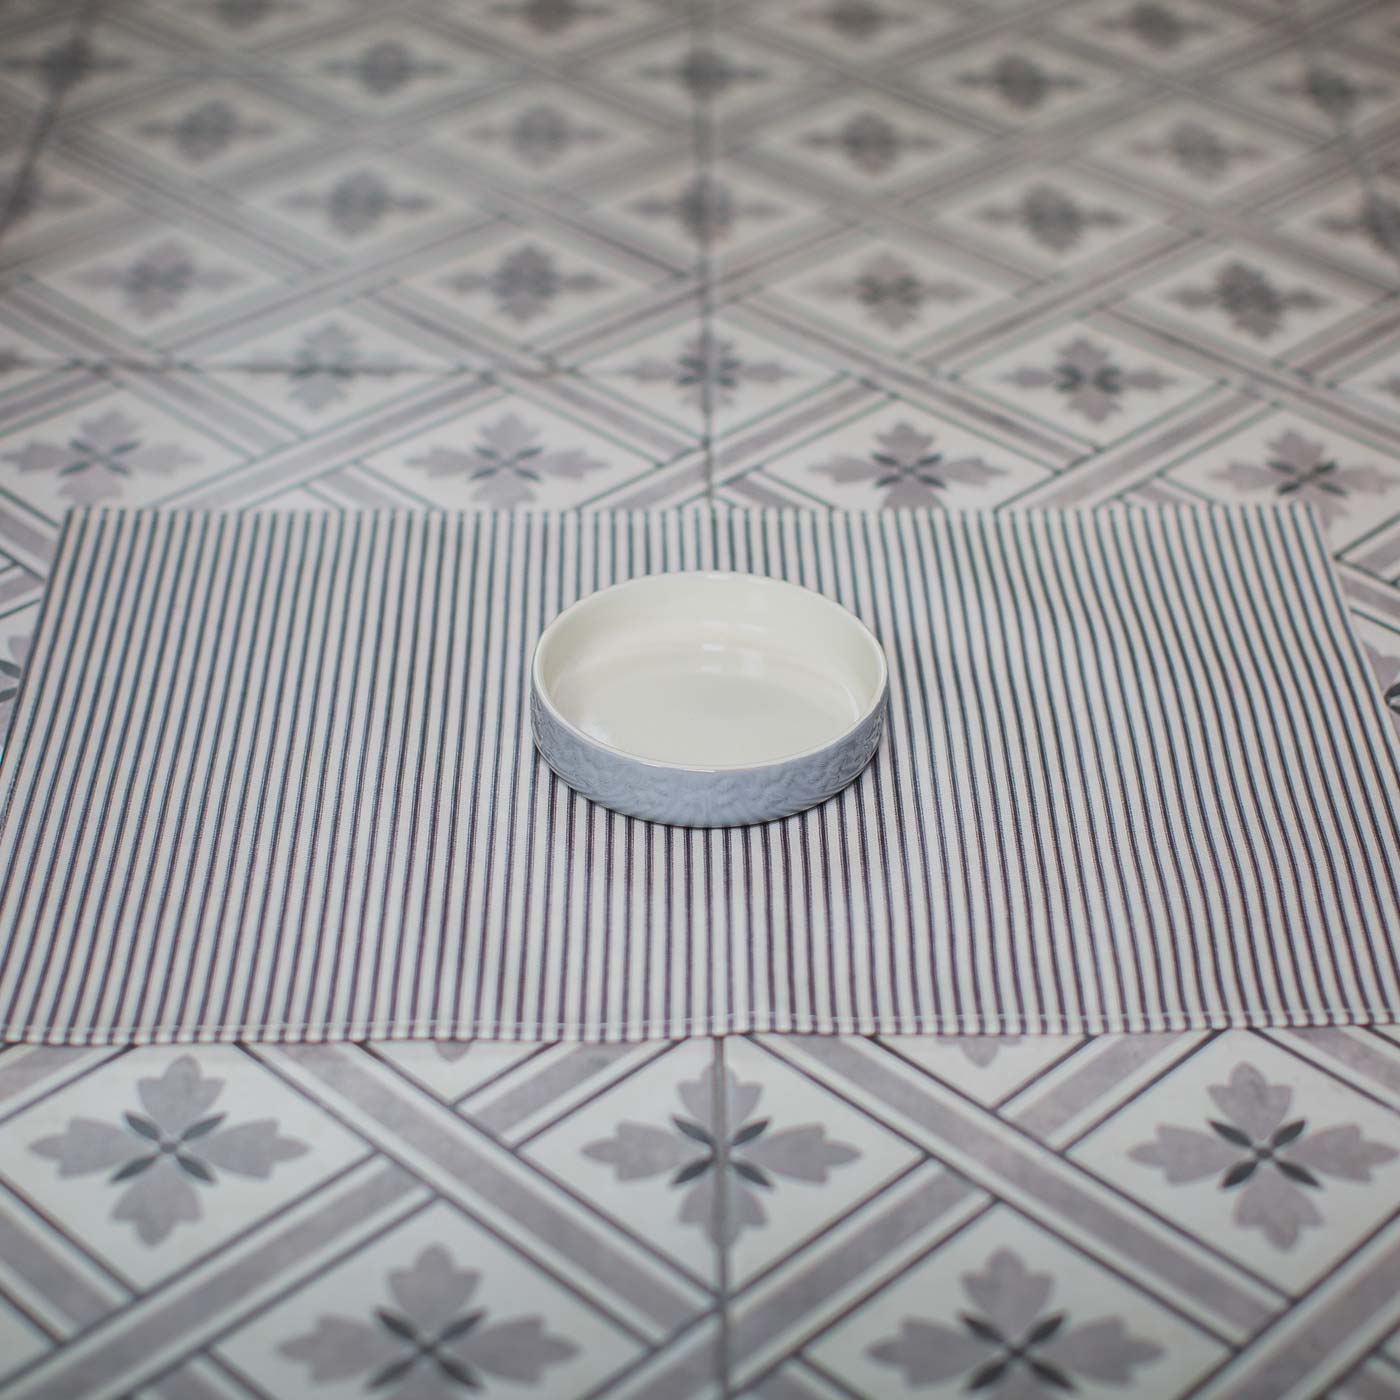 Discover Pet Feeding Placemat in Regency Stripe. Available at Lords and Labradors US